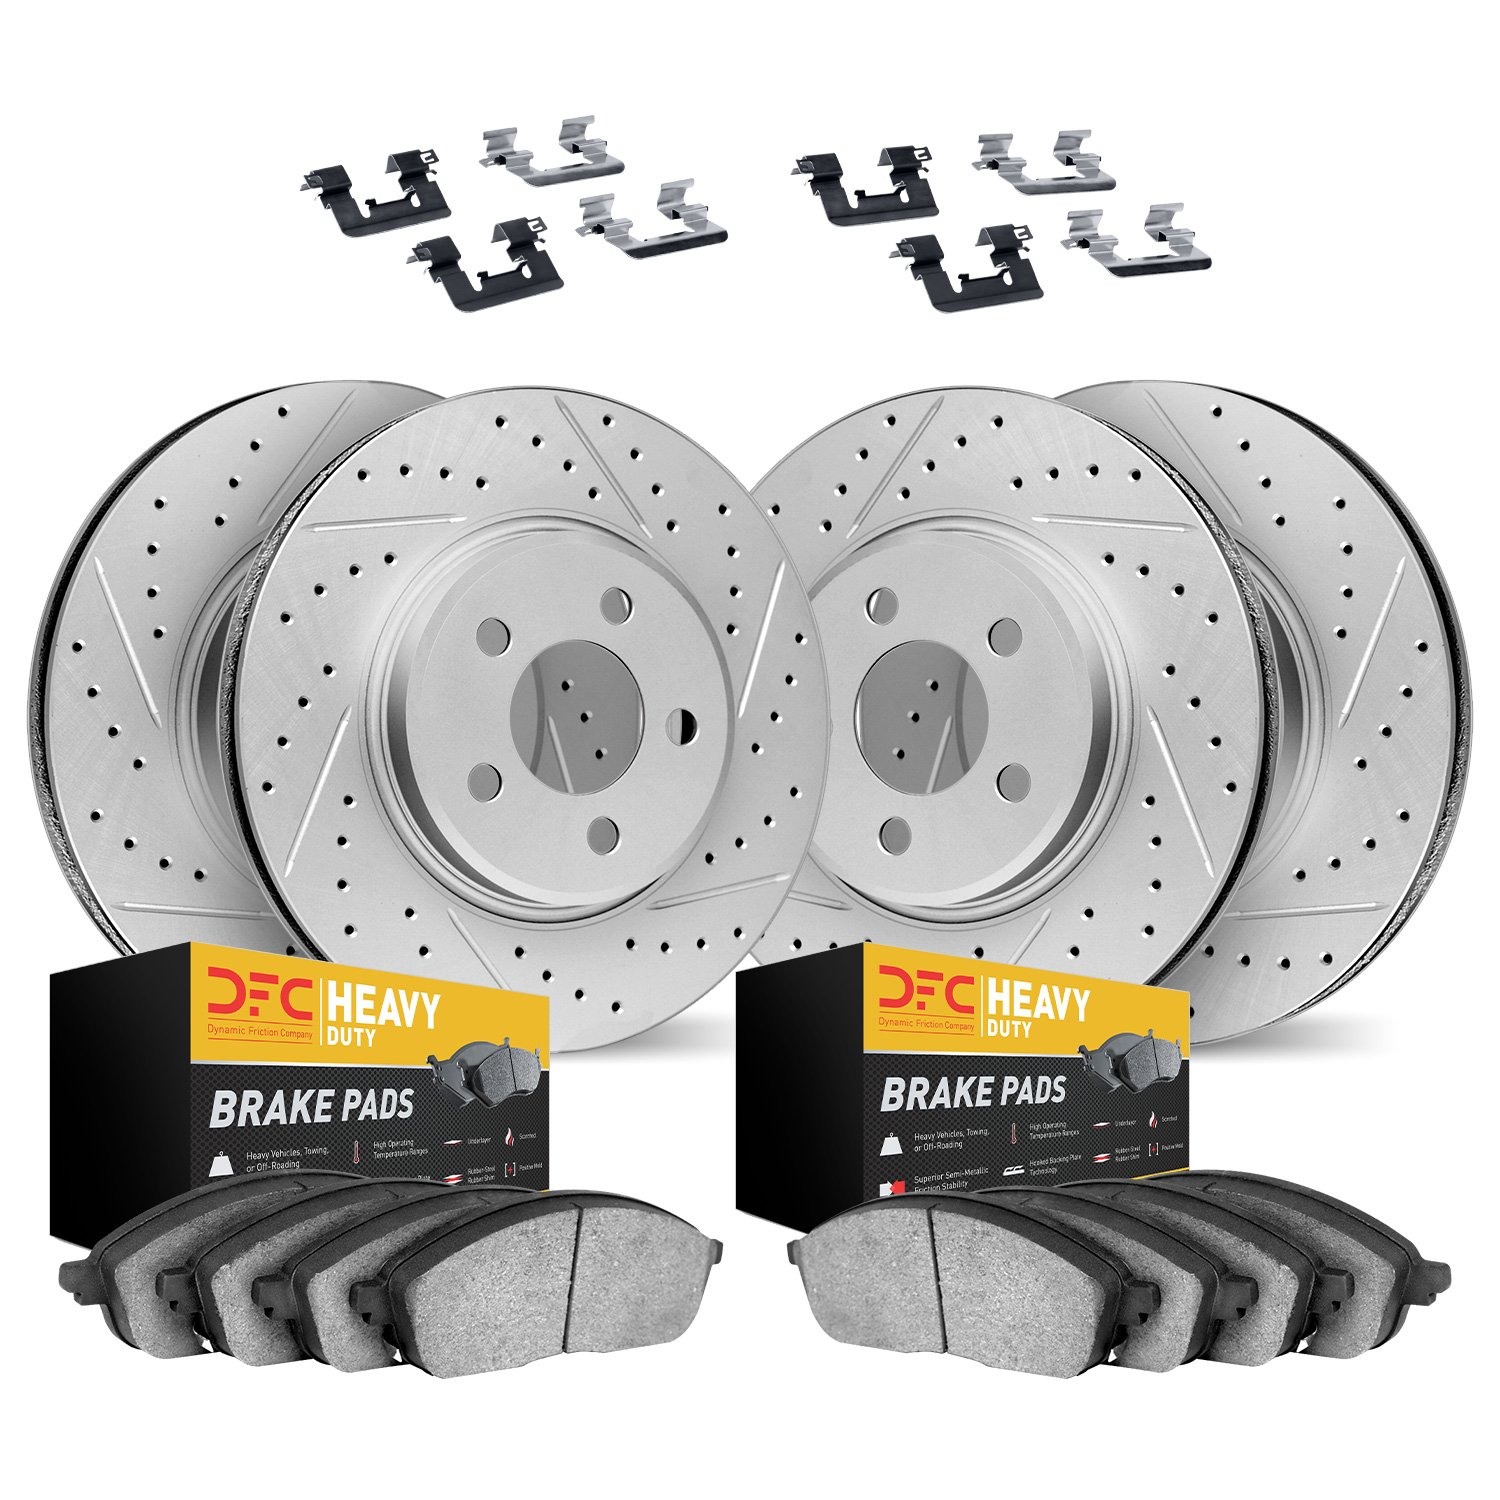 2214-39017 Geoperformance Drilled/Slotted Rotors w/Heavy-Duty Pads Kit & Hardware, Fits Select Mopar, Position: Front and Rear